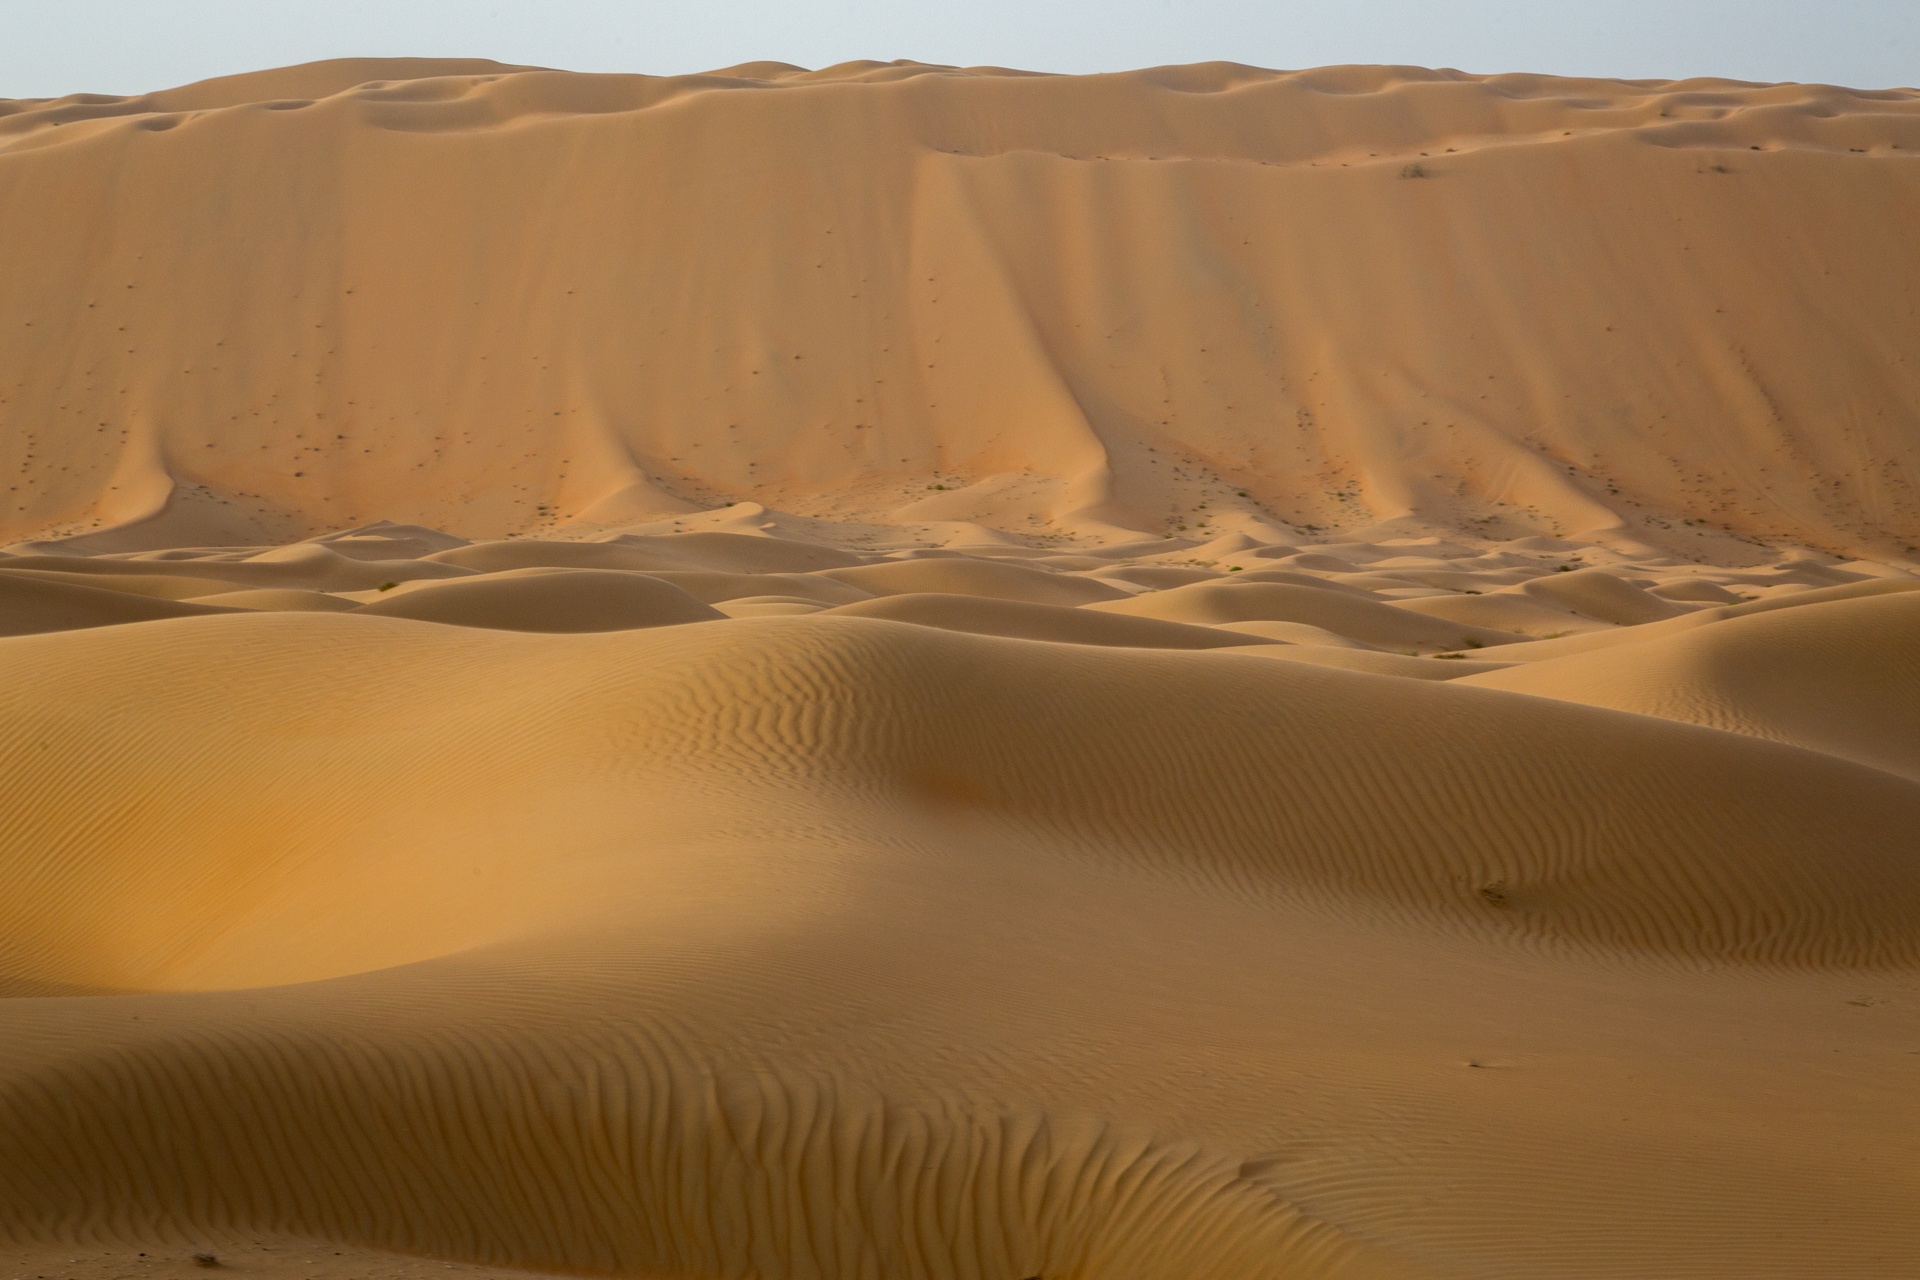 Sand dune formations